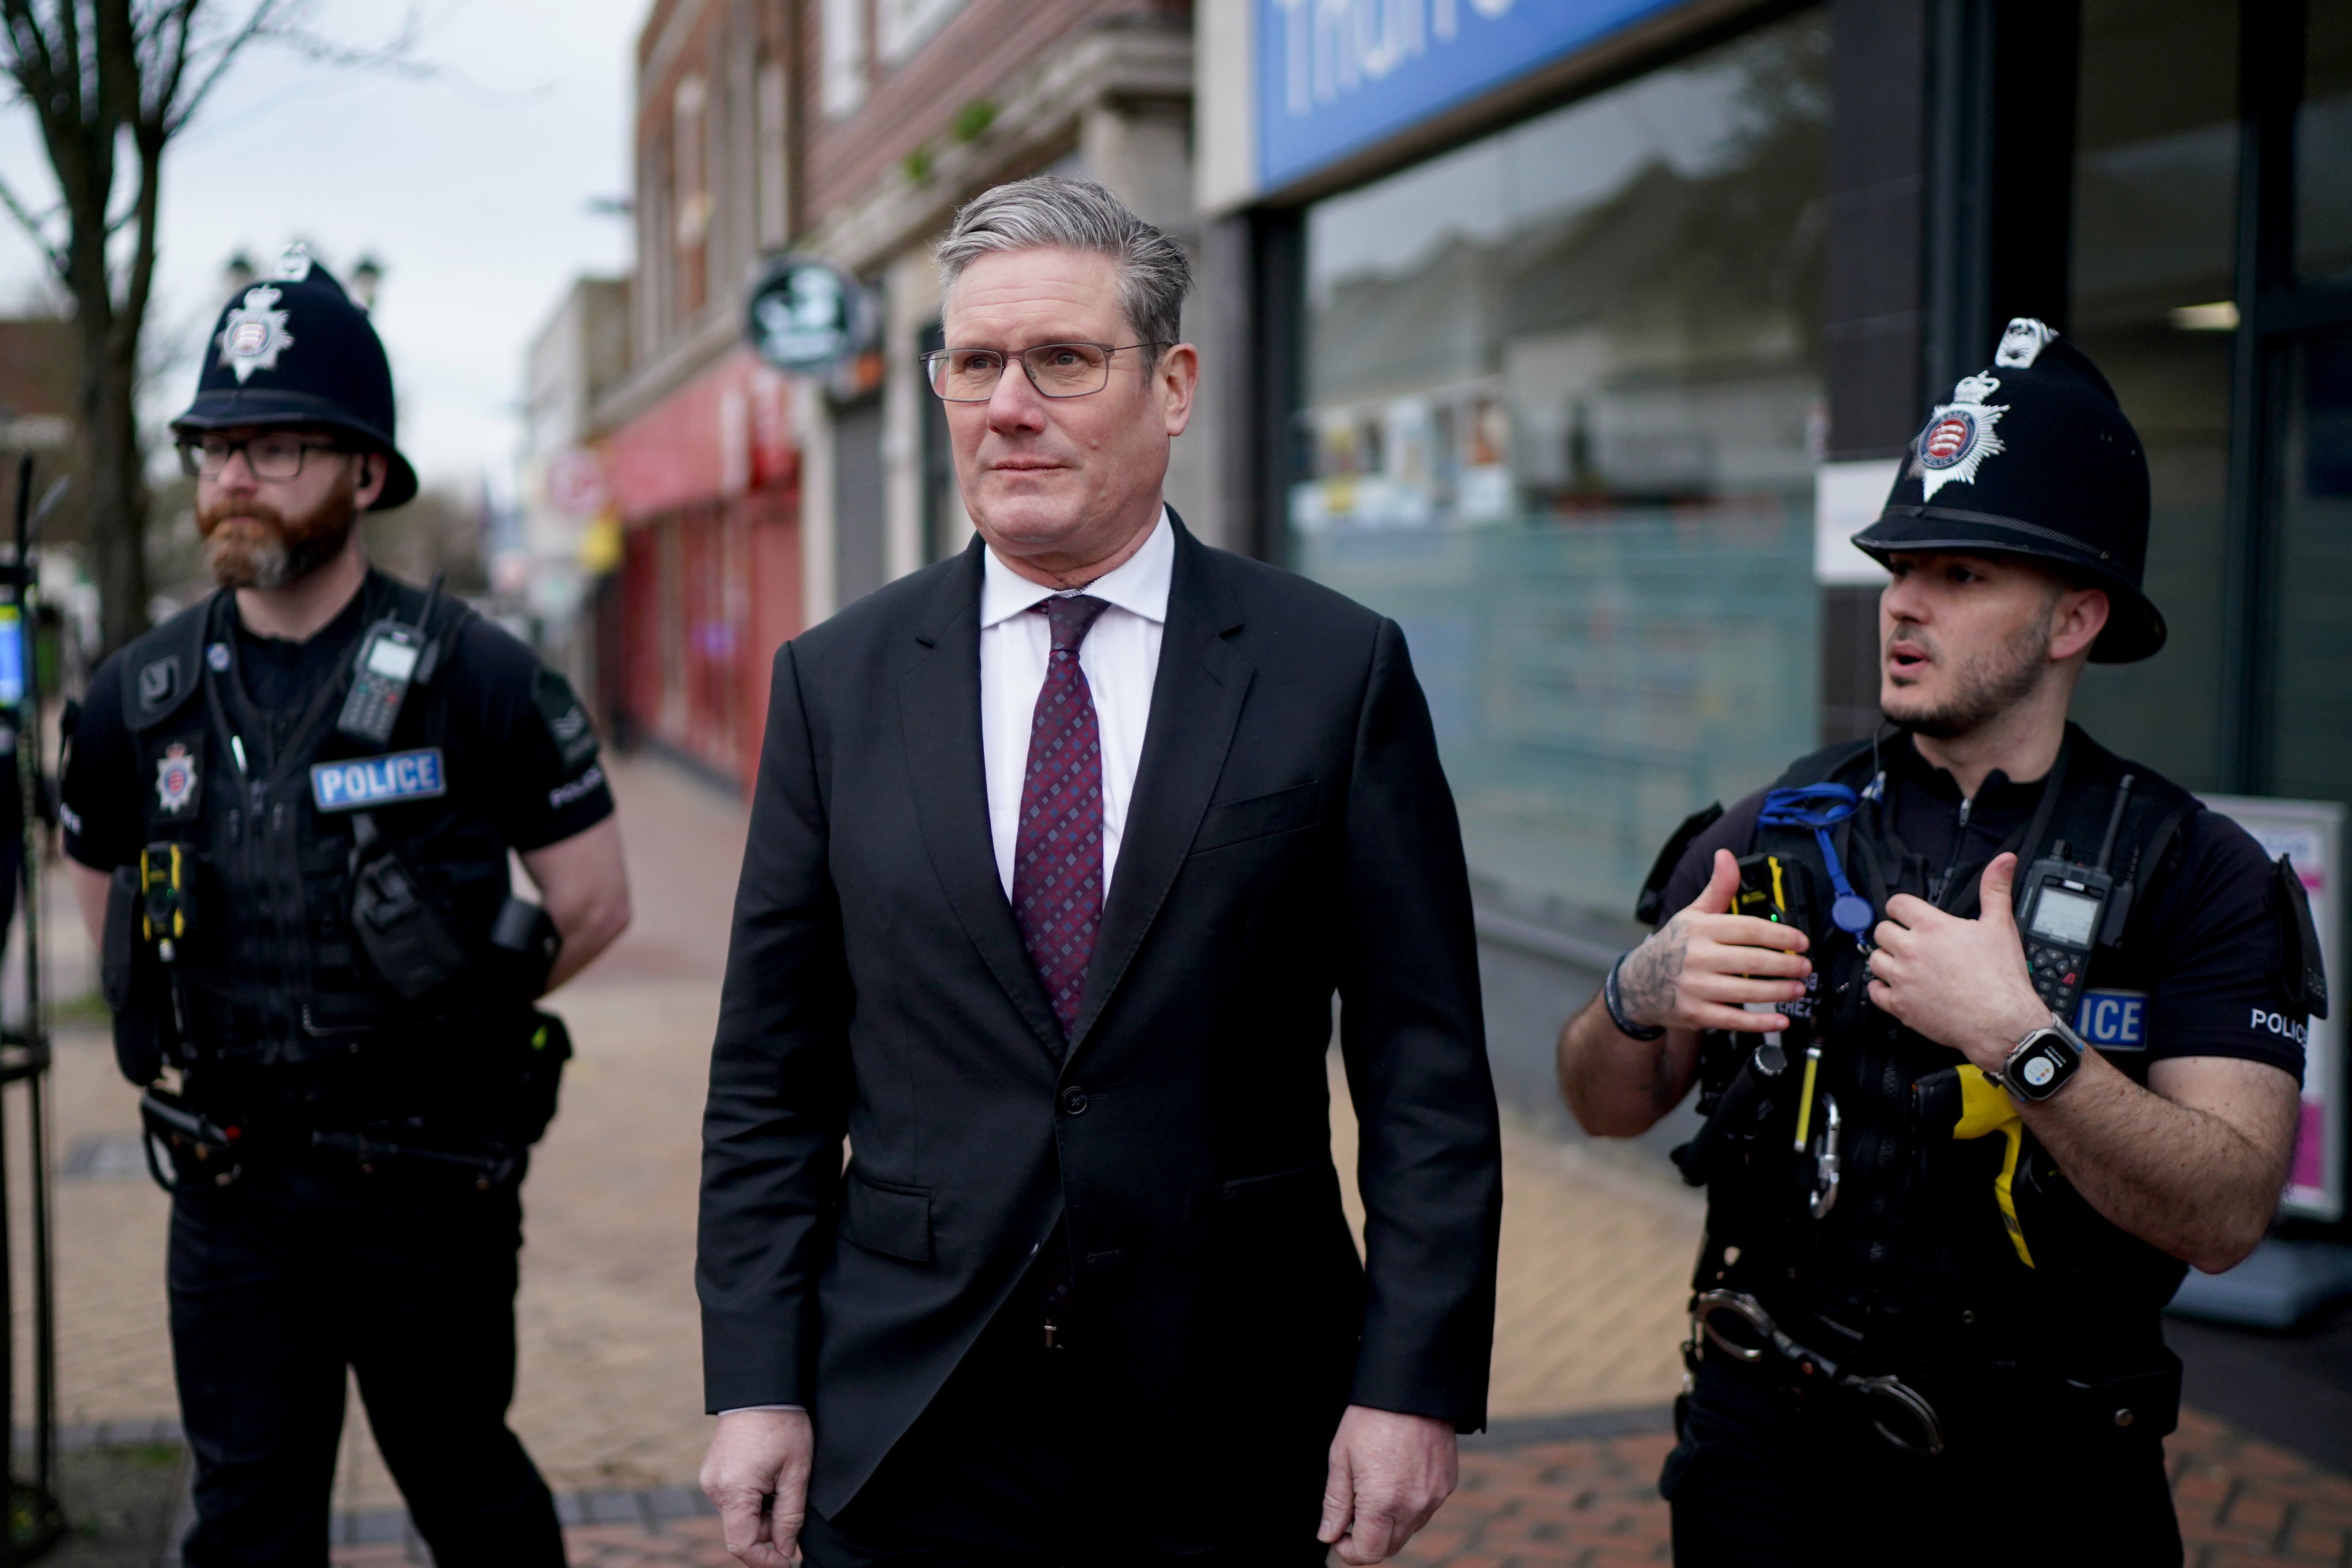 A Labour government would launch a £100 million youth programme to tackle knife crime, Sir Keir Starmer has said (Gareth Fuller/PA)